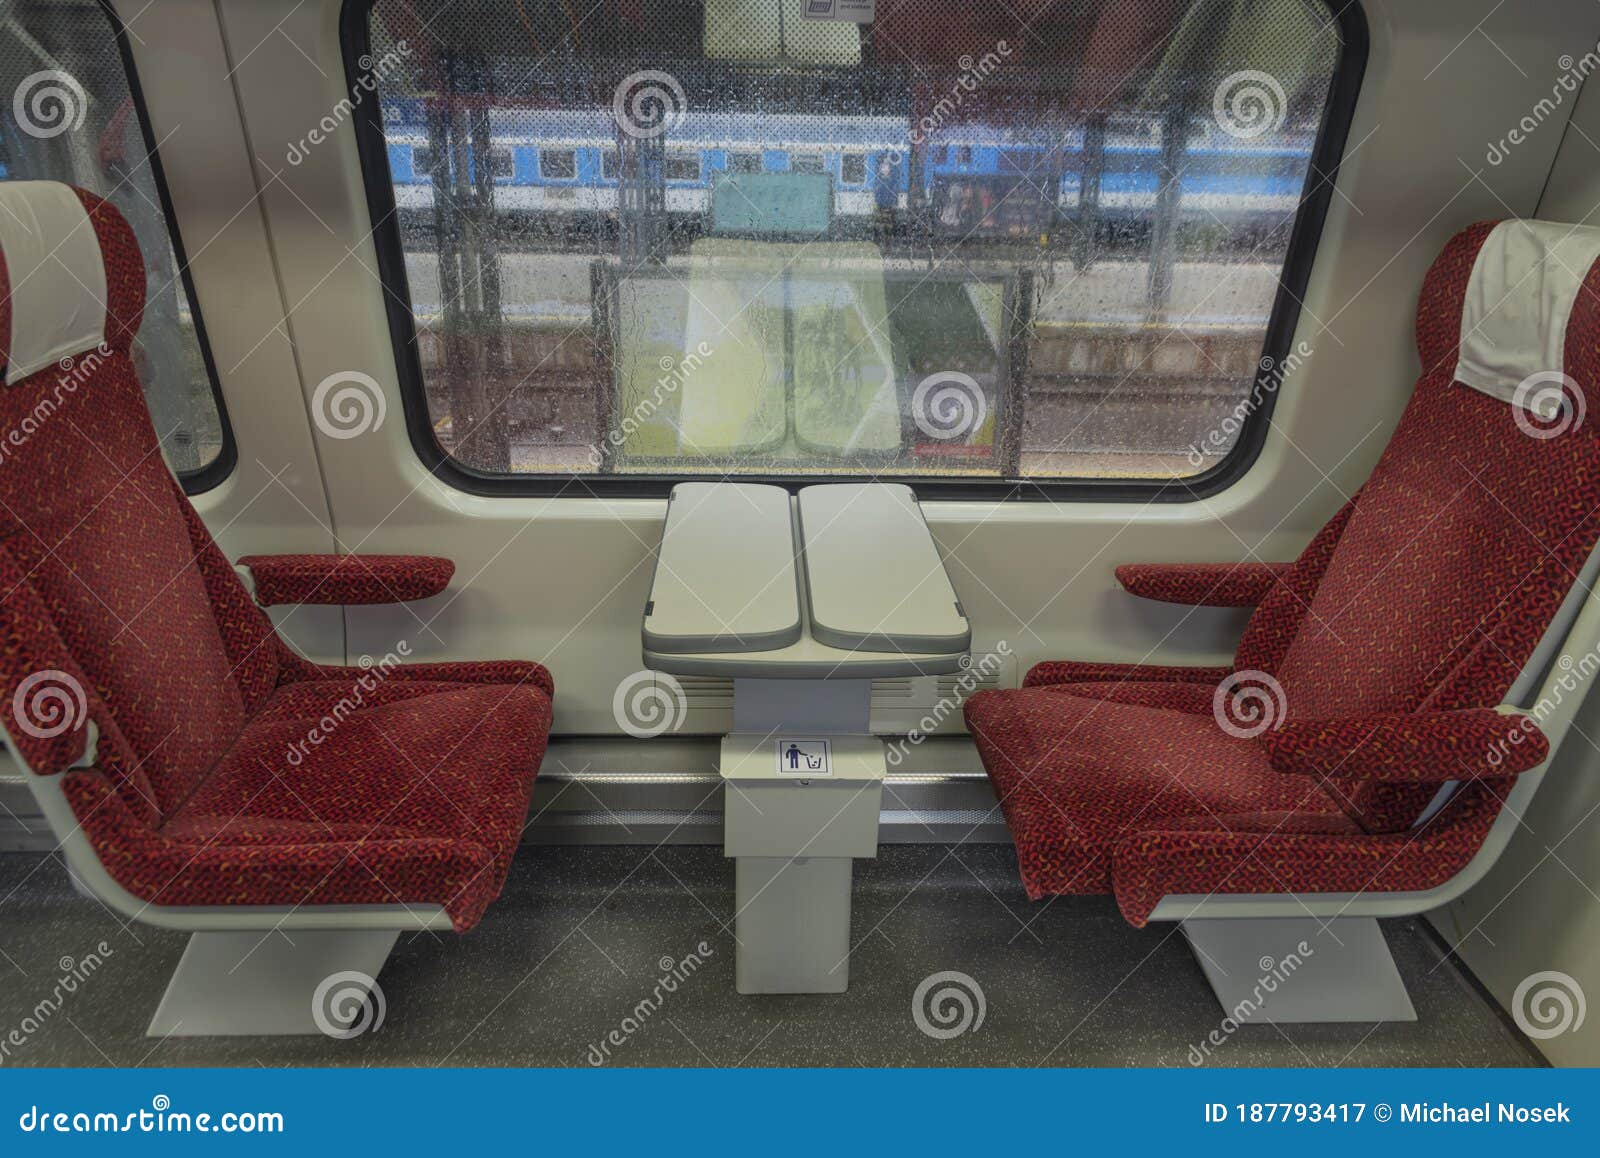 Electric Multiple Unit Interior with Red Seat in First Class Coach Stock  Image - Image of traffic, tourist: 187793417